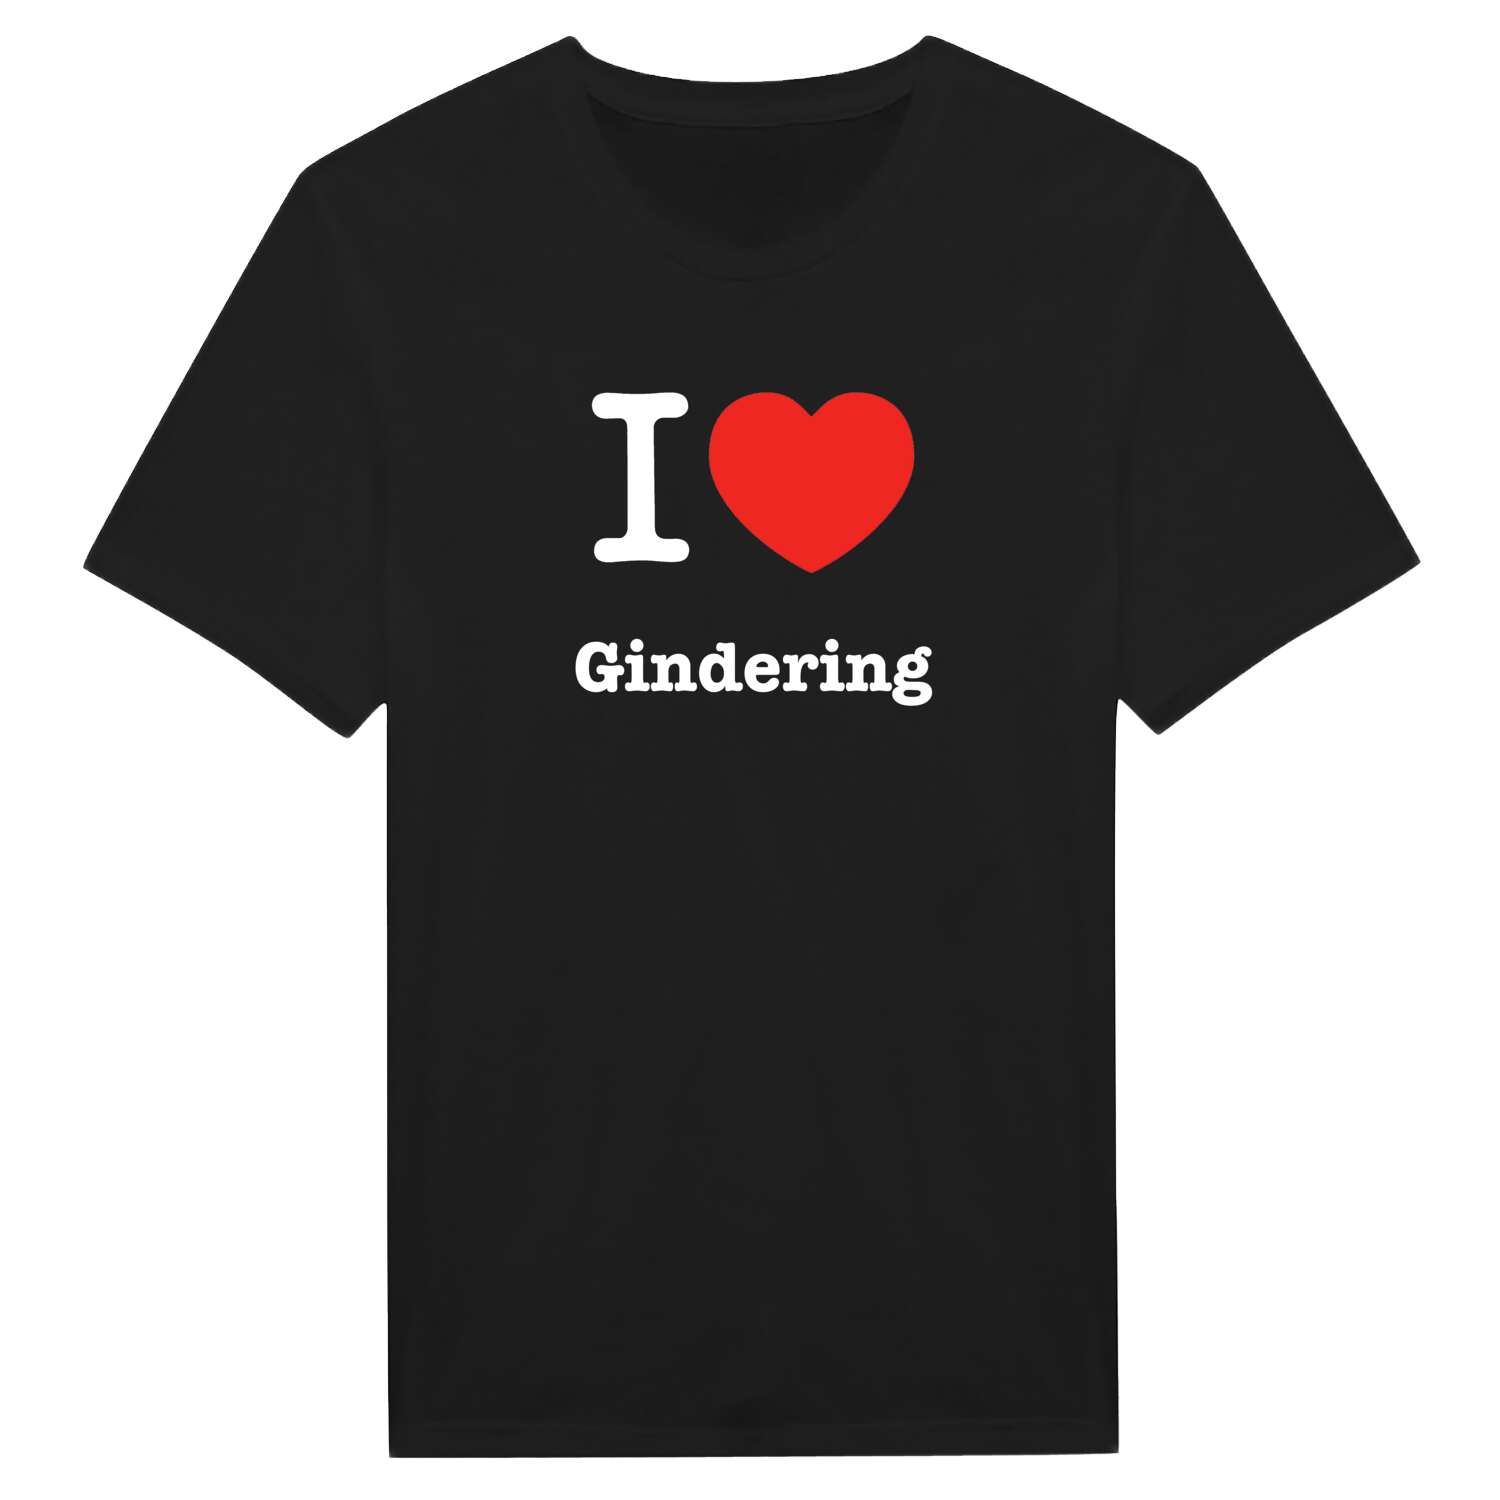 Gindering T-Shirt »I love«